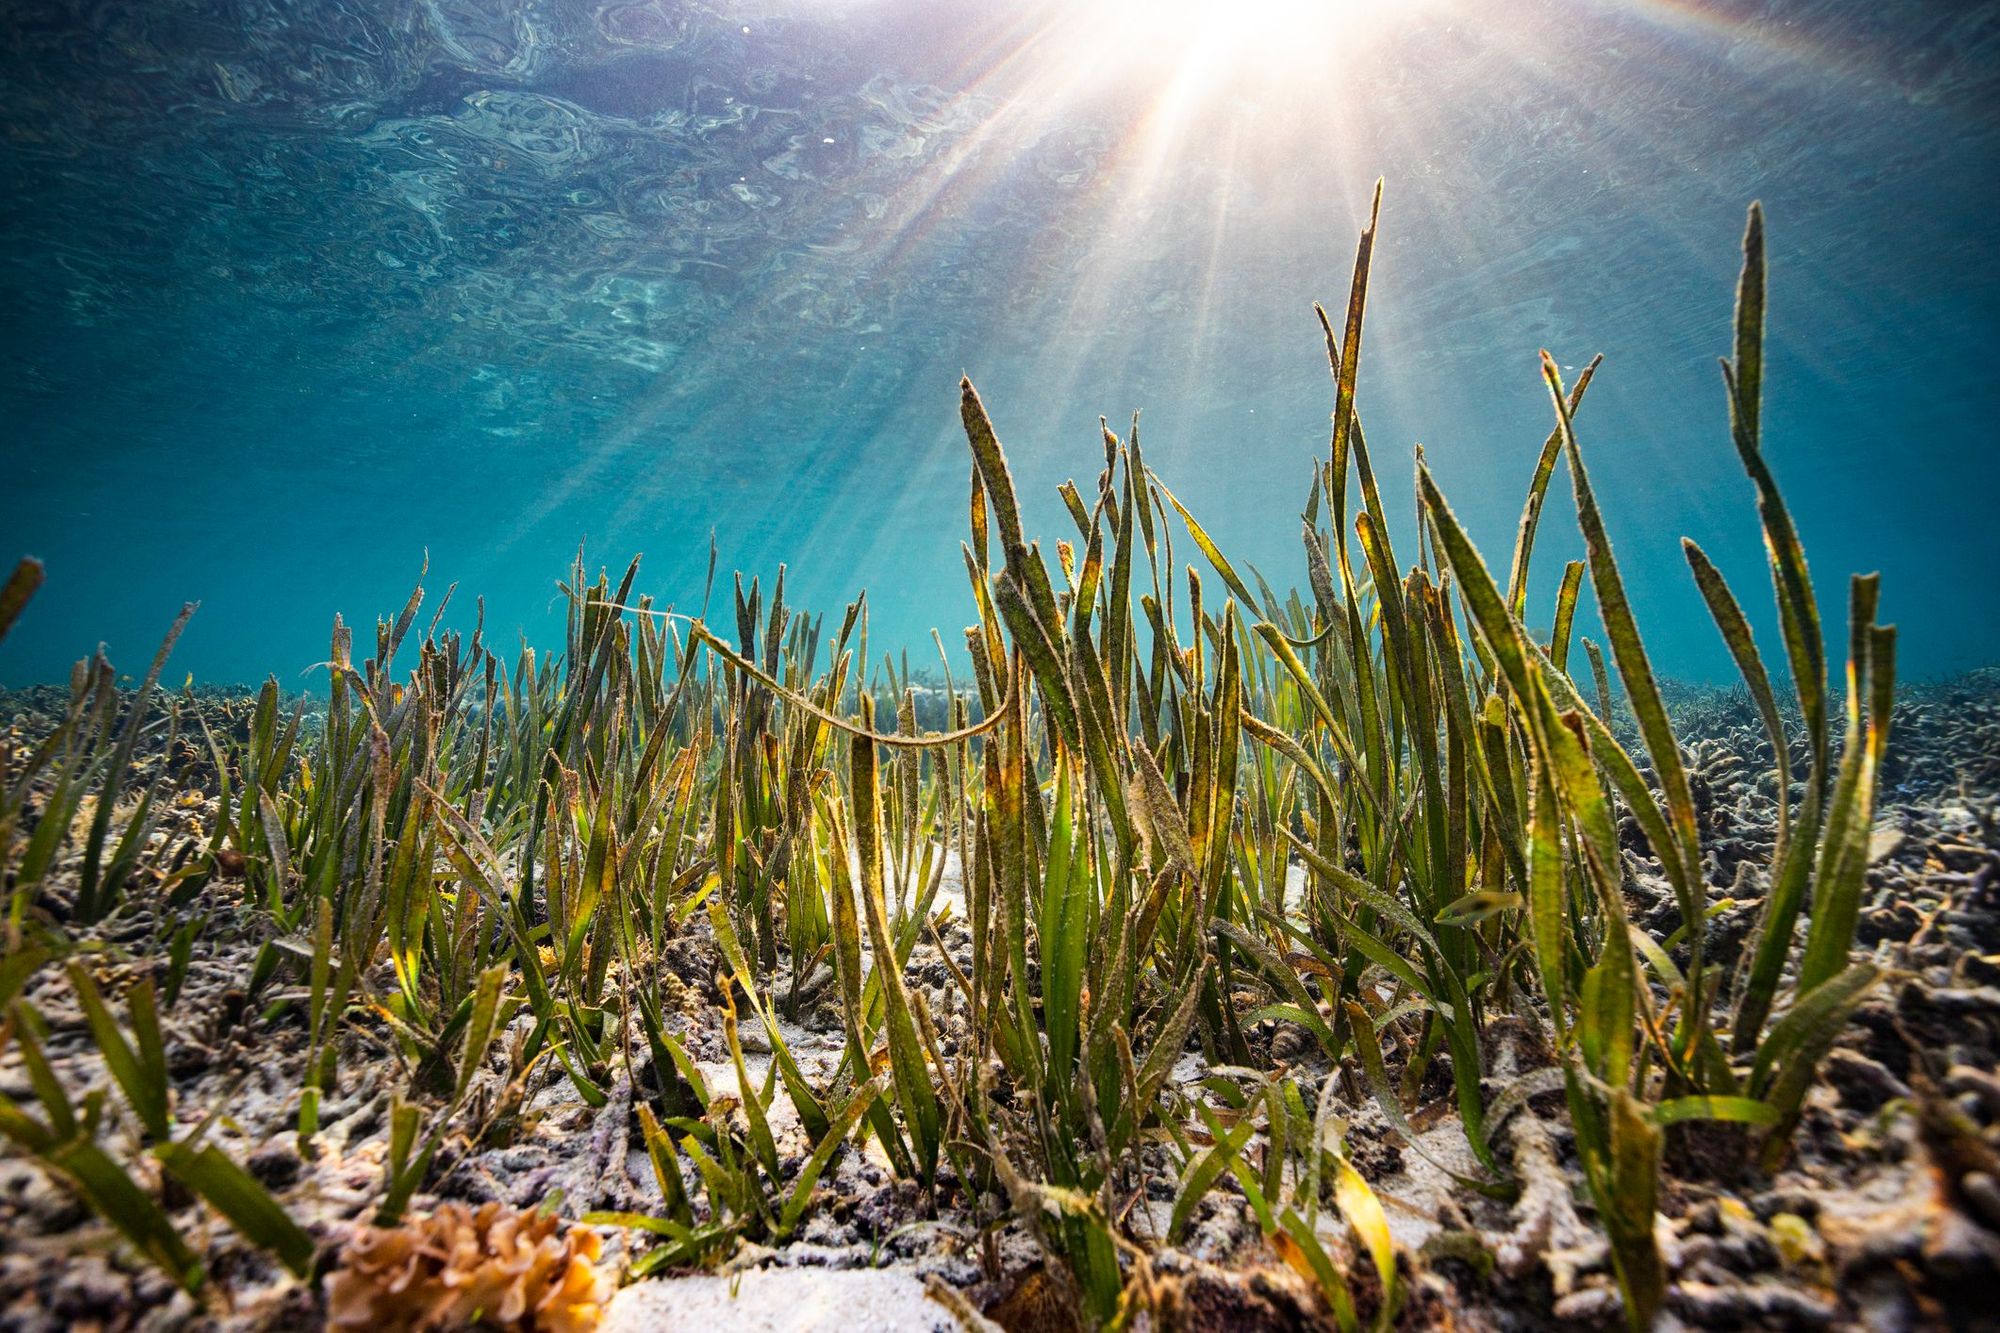 Seagrass plants photographed underwater